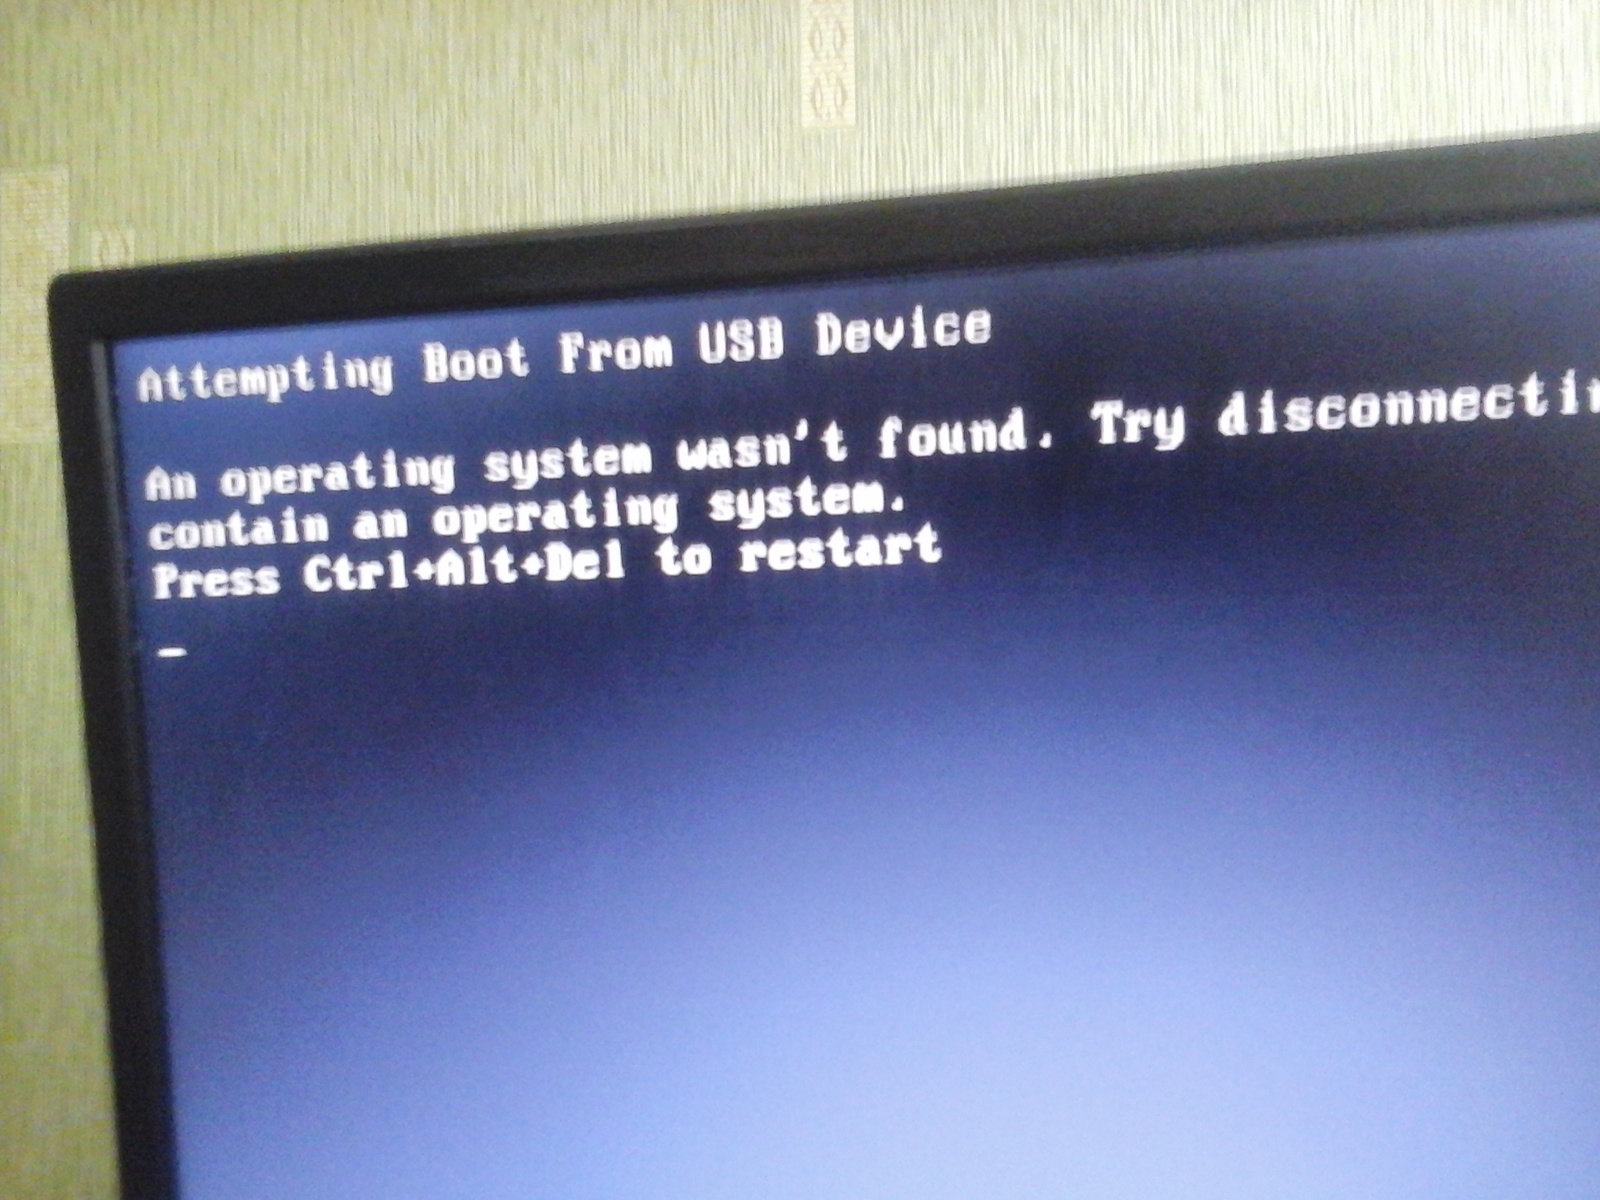 Переустановка с образом\. Press any Key to Boot from USB pic. An operating System wasn't found try disconnecting any Drives that don't contain an operating System. Boot attempt